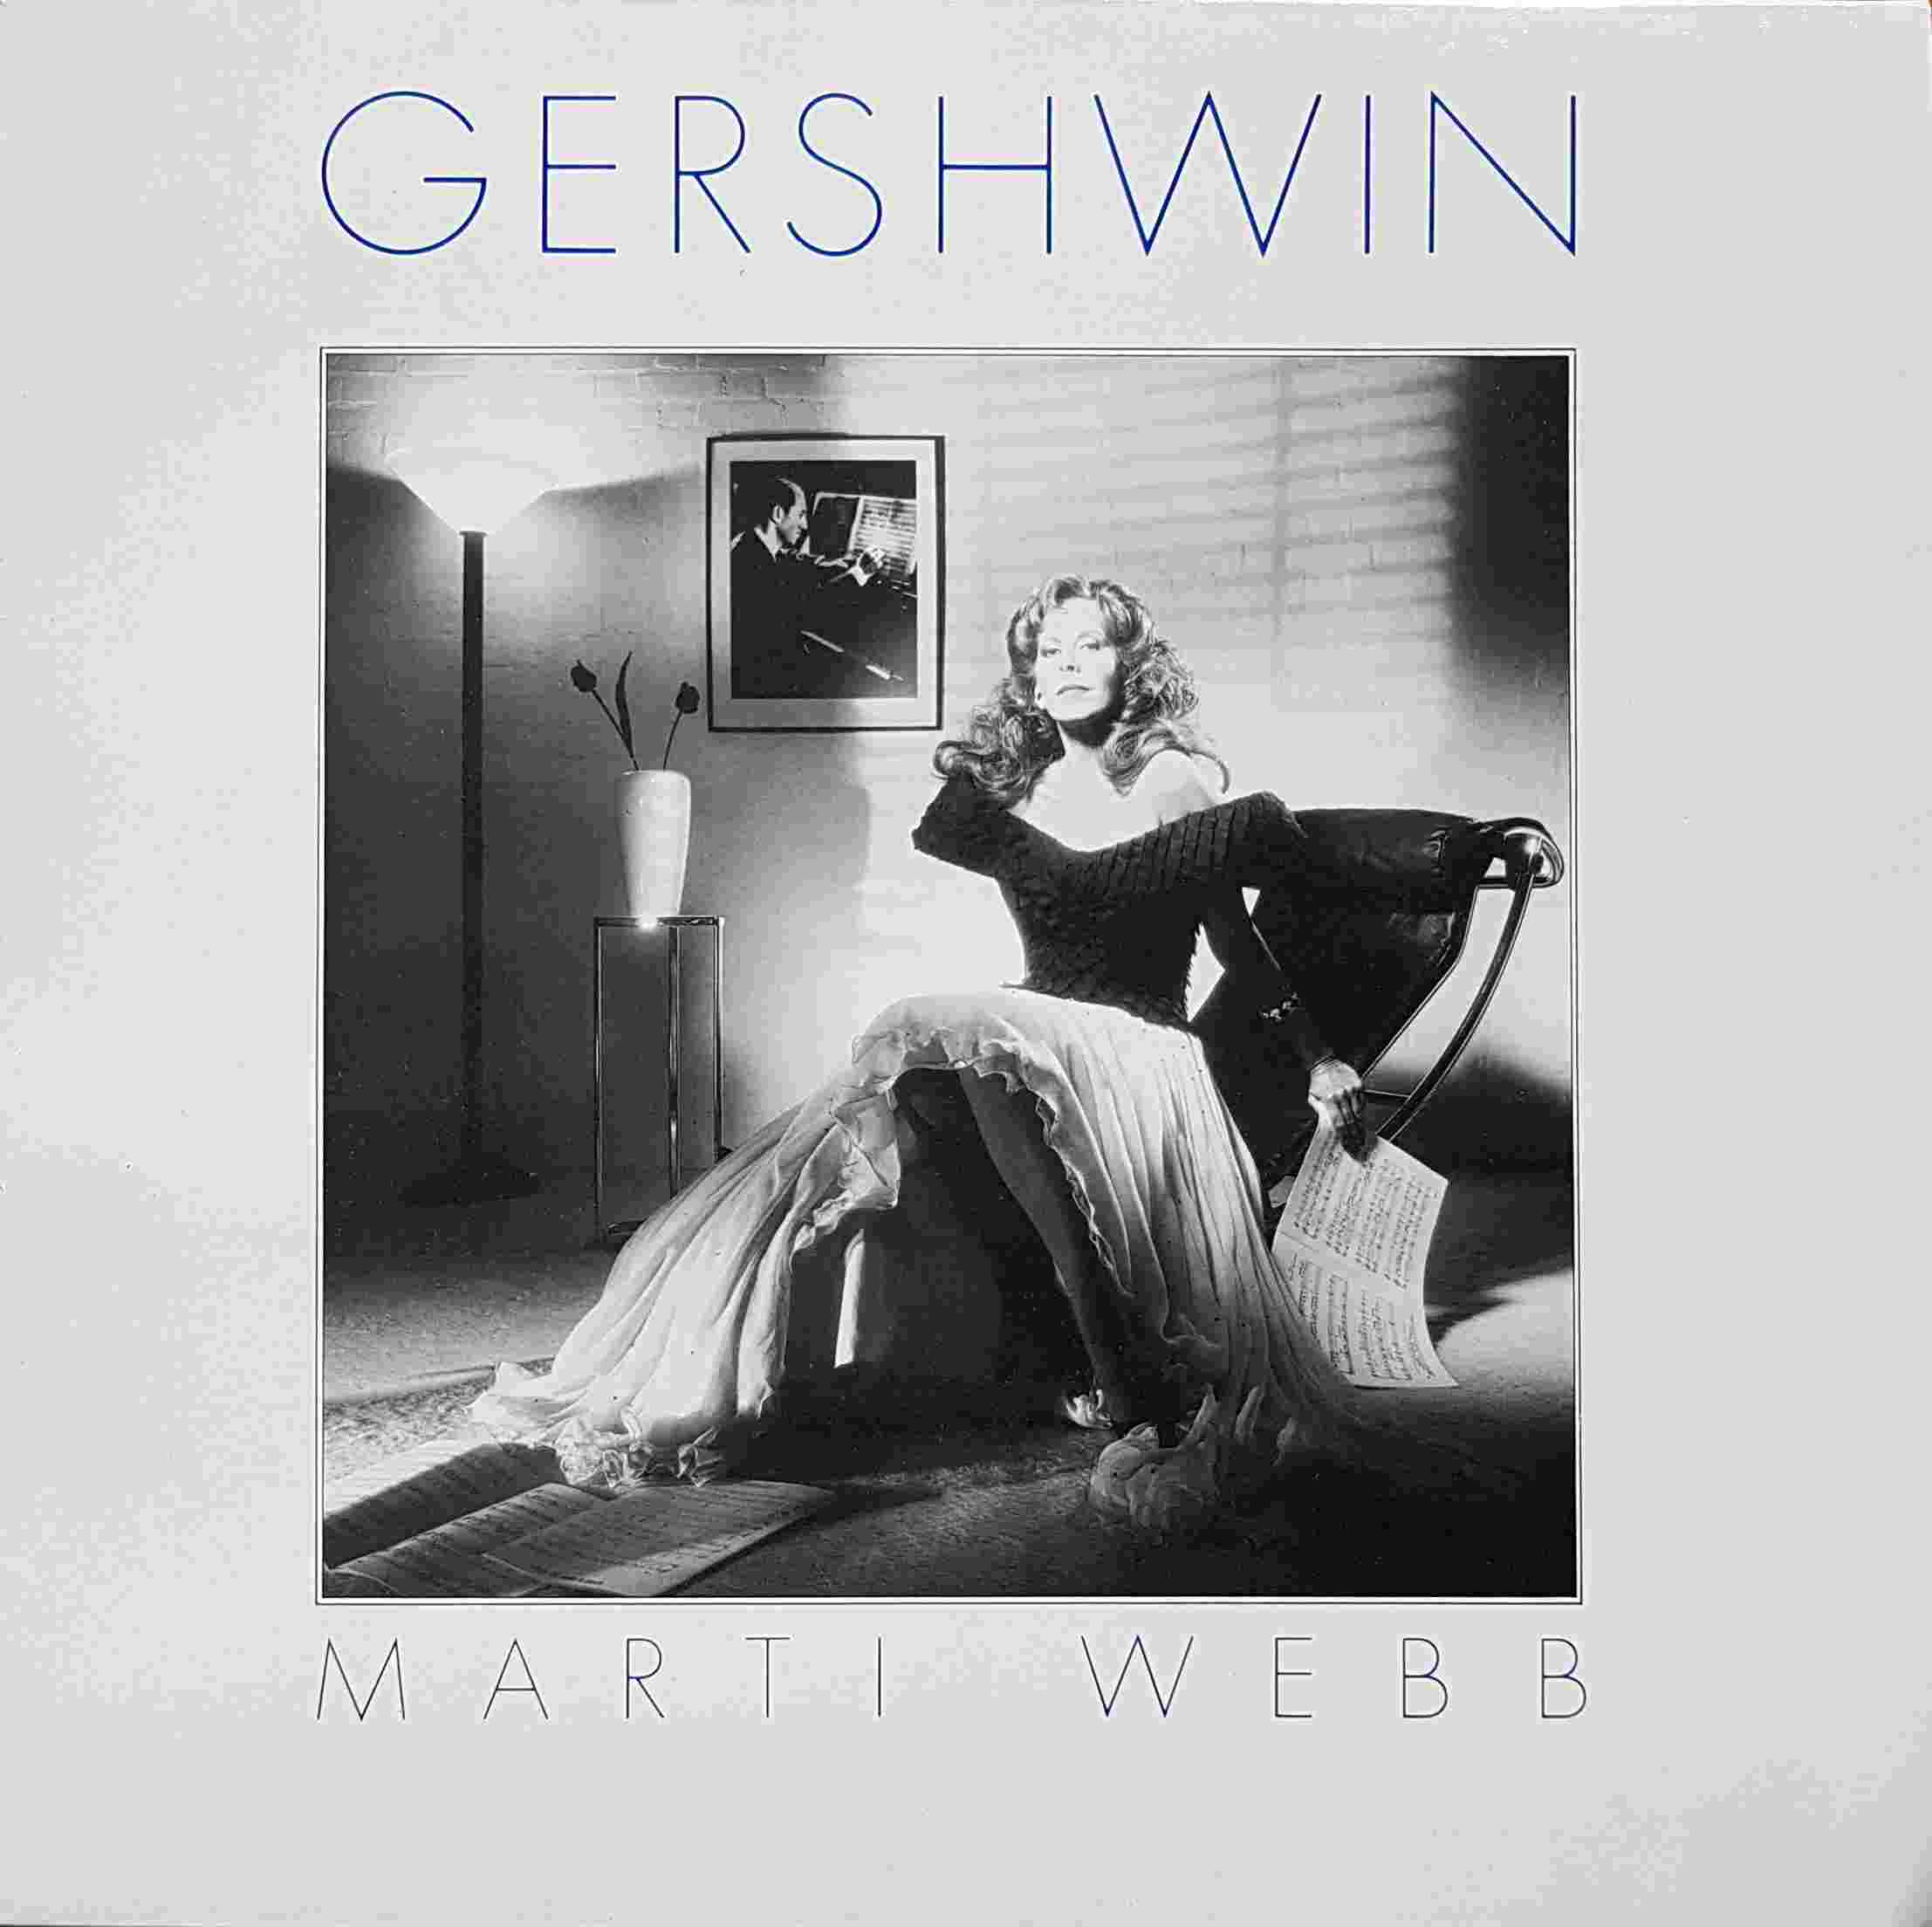 Picture of REB 640 Gershwin by artist Marti Webb from the BBC albums - Records and Tapes library